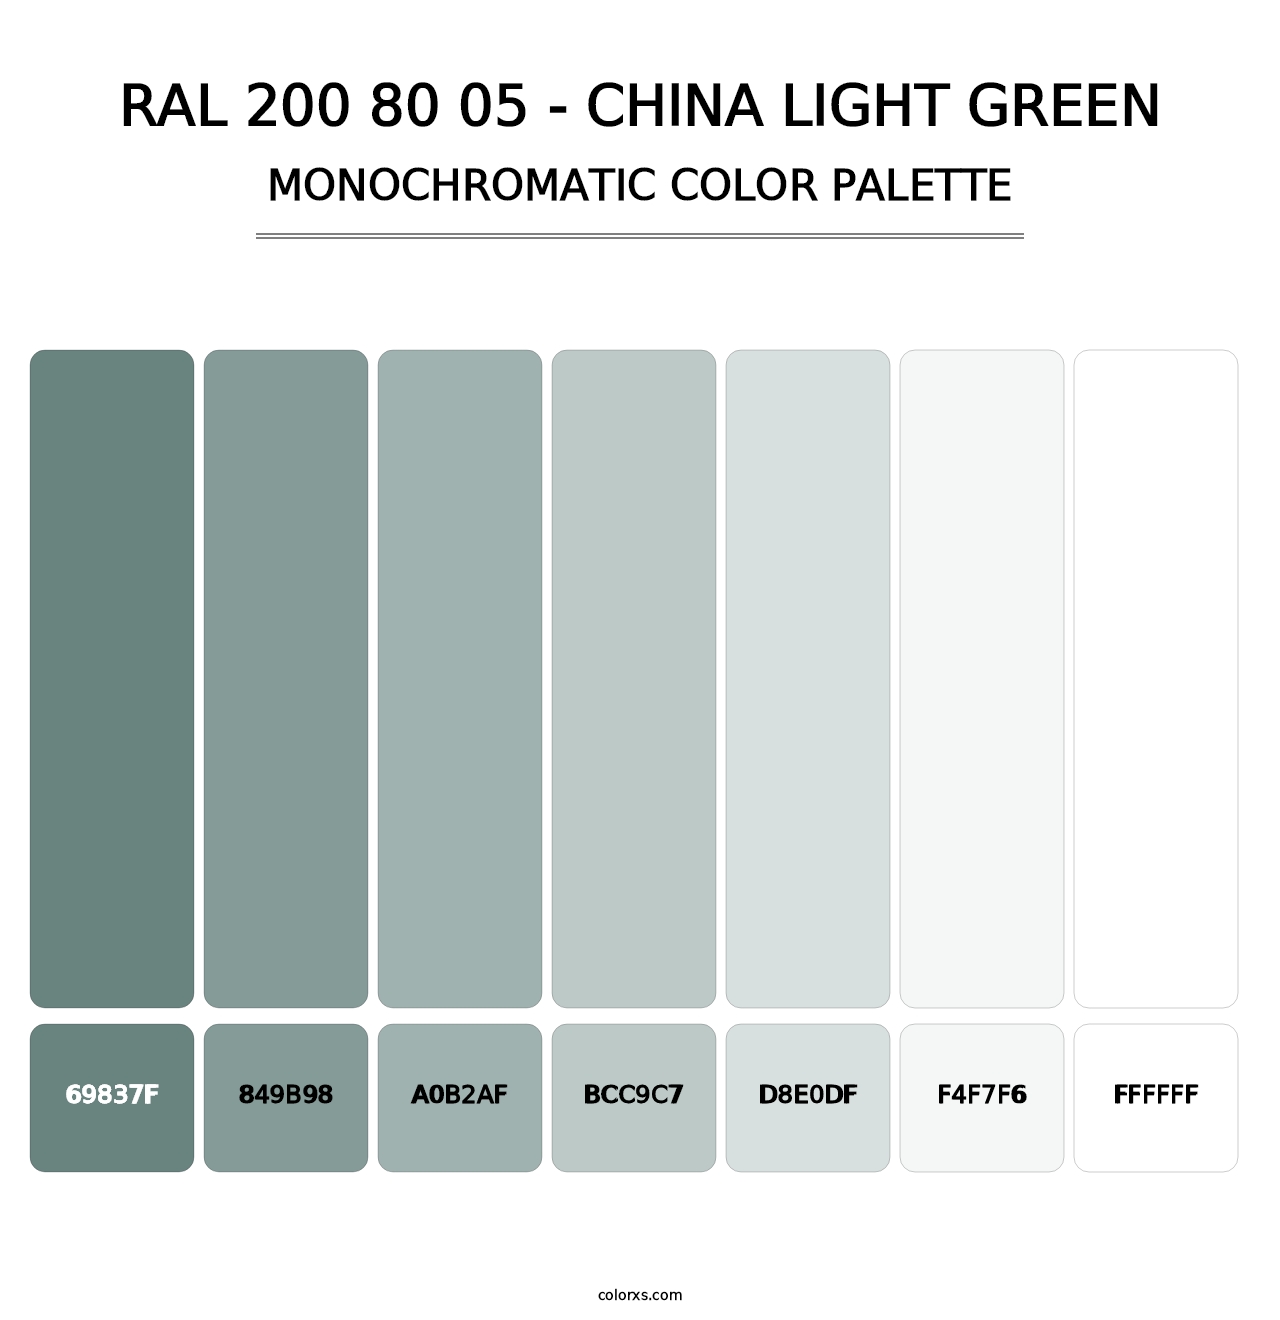 RAL 200 80 05 - China Light Green - Monochromatic Color Palette